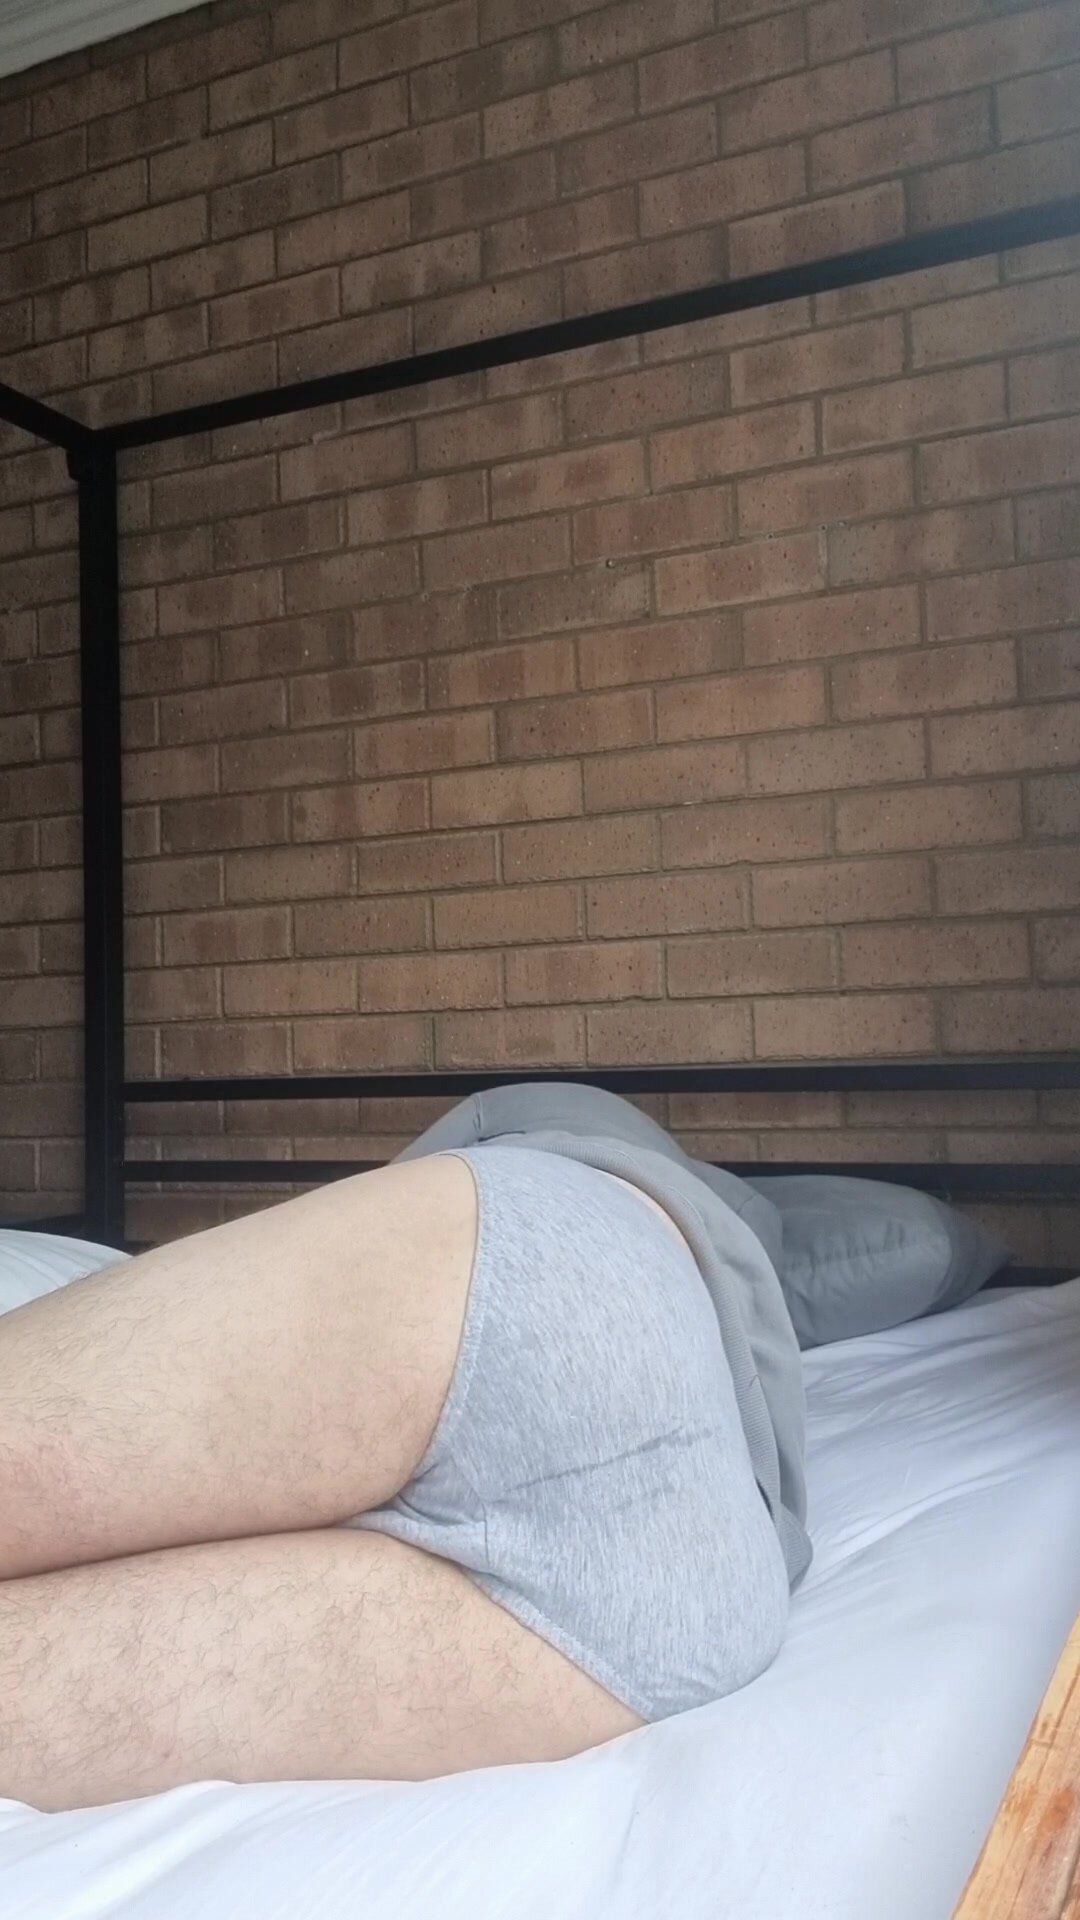 Pooing the bed - video 2